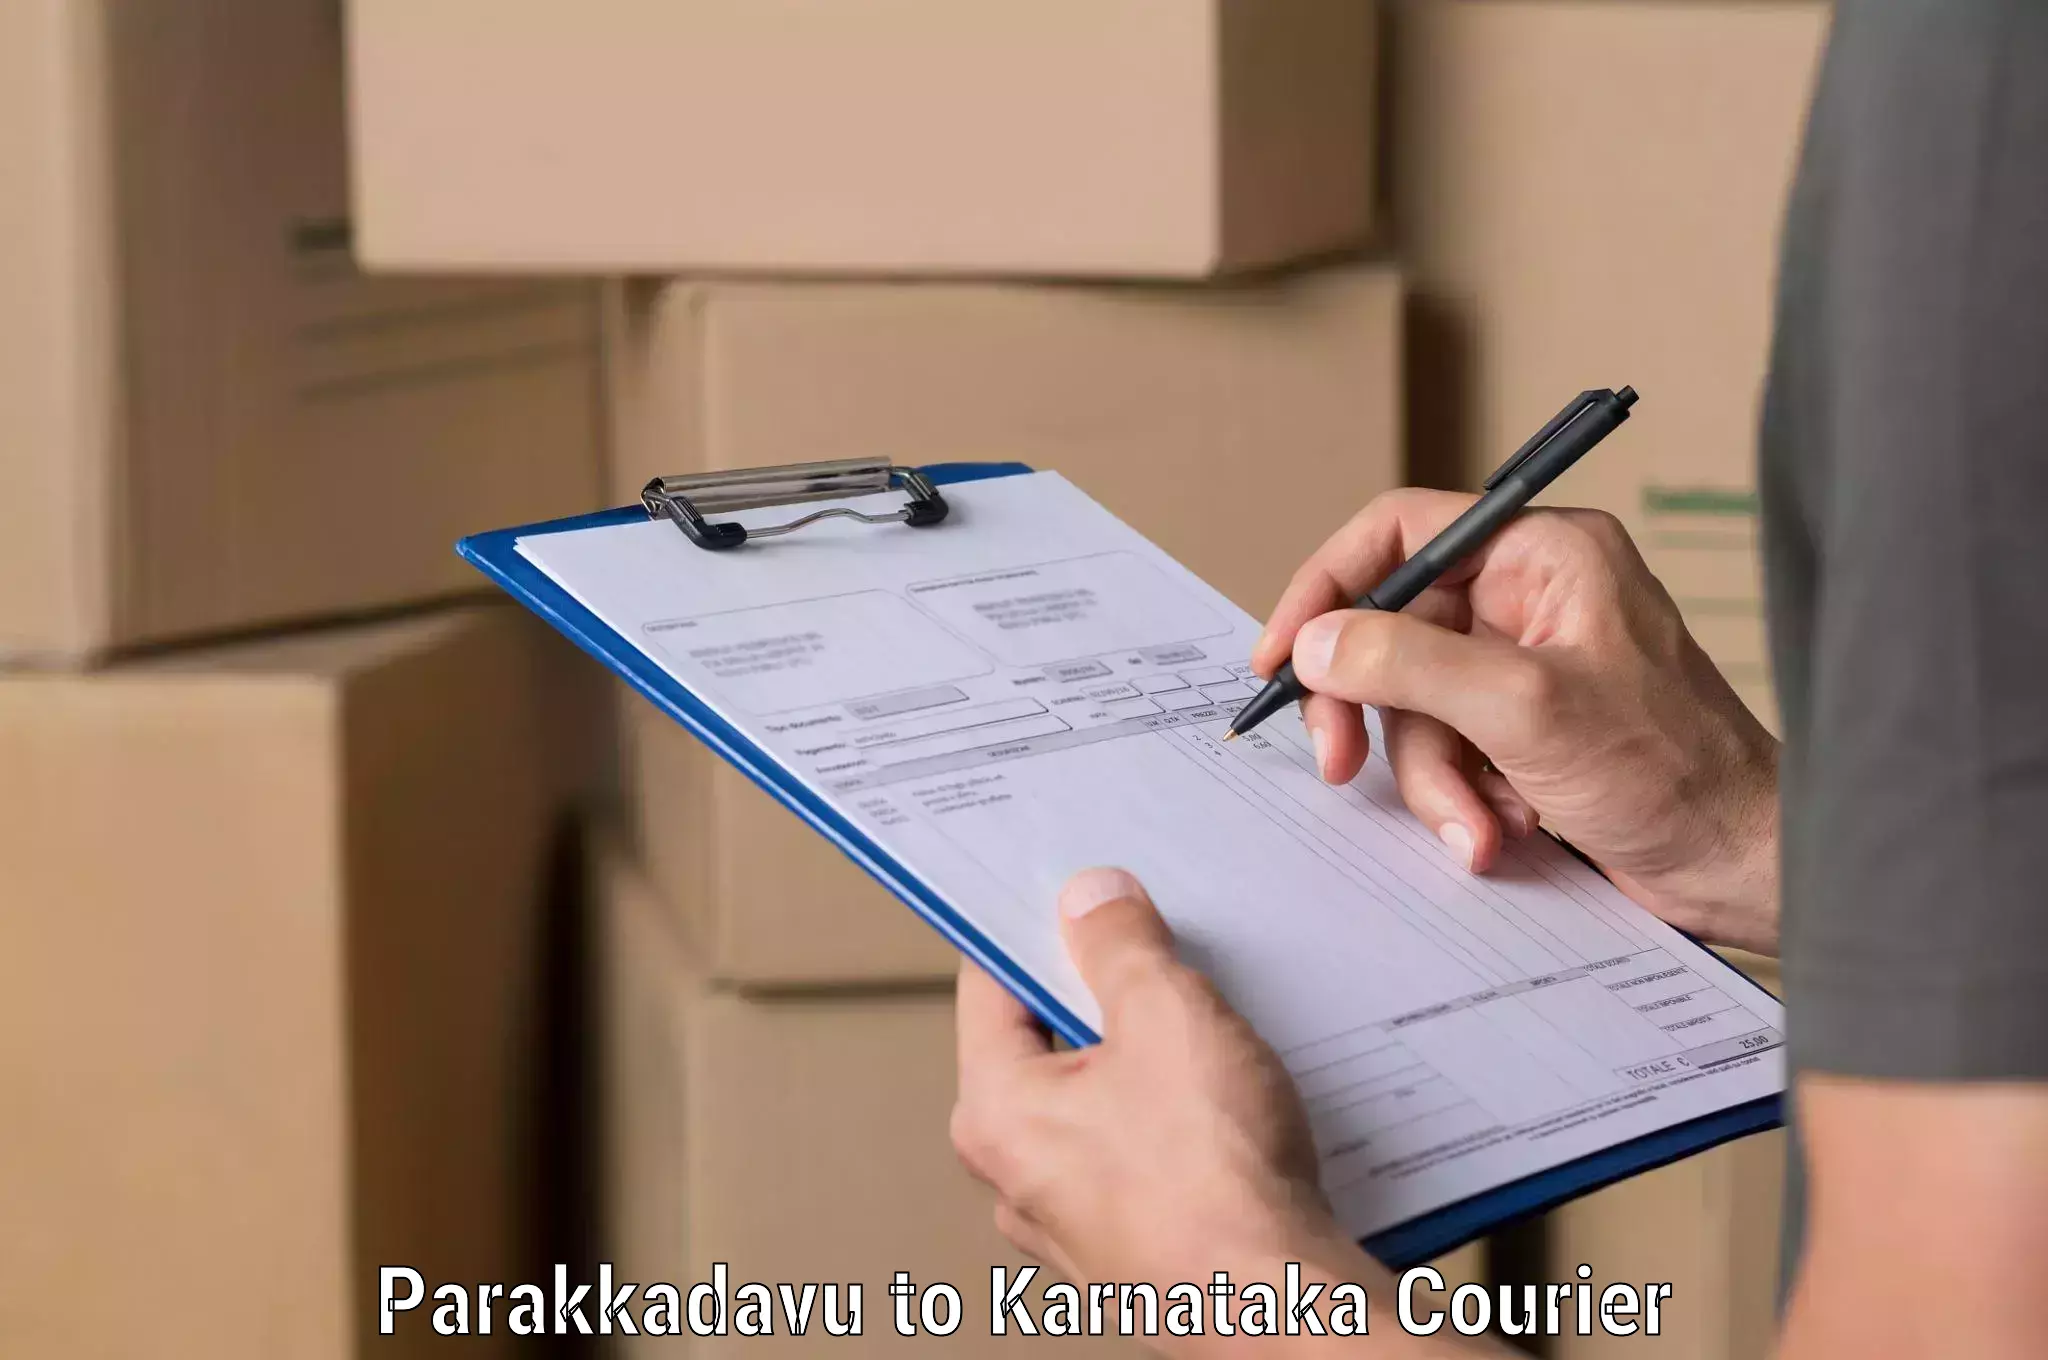 Rural area delivery Parakkadavu to Manipal Academy of Higher Education